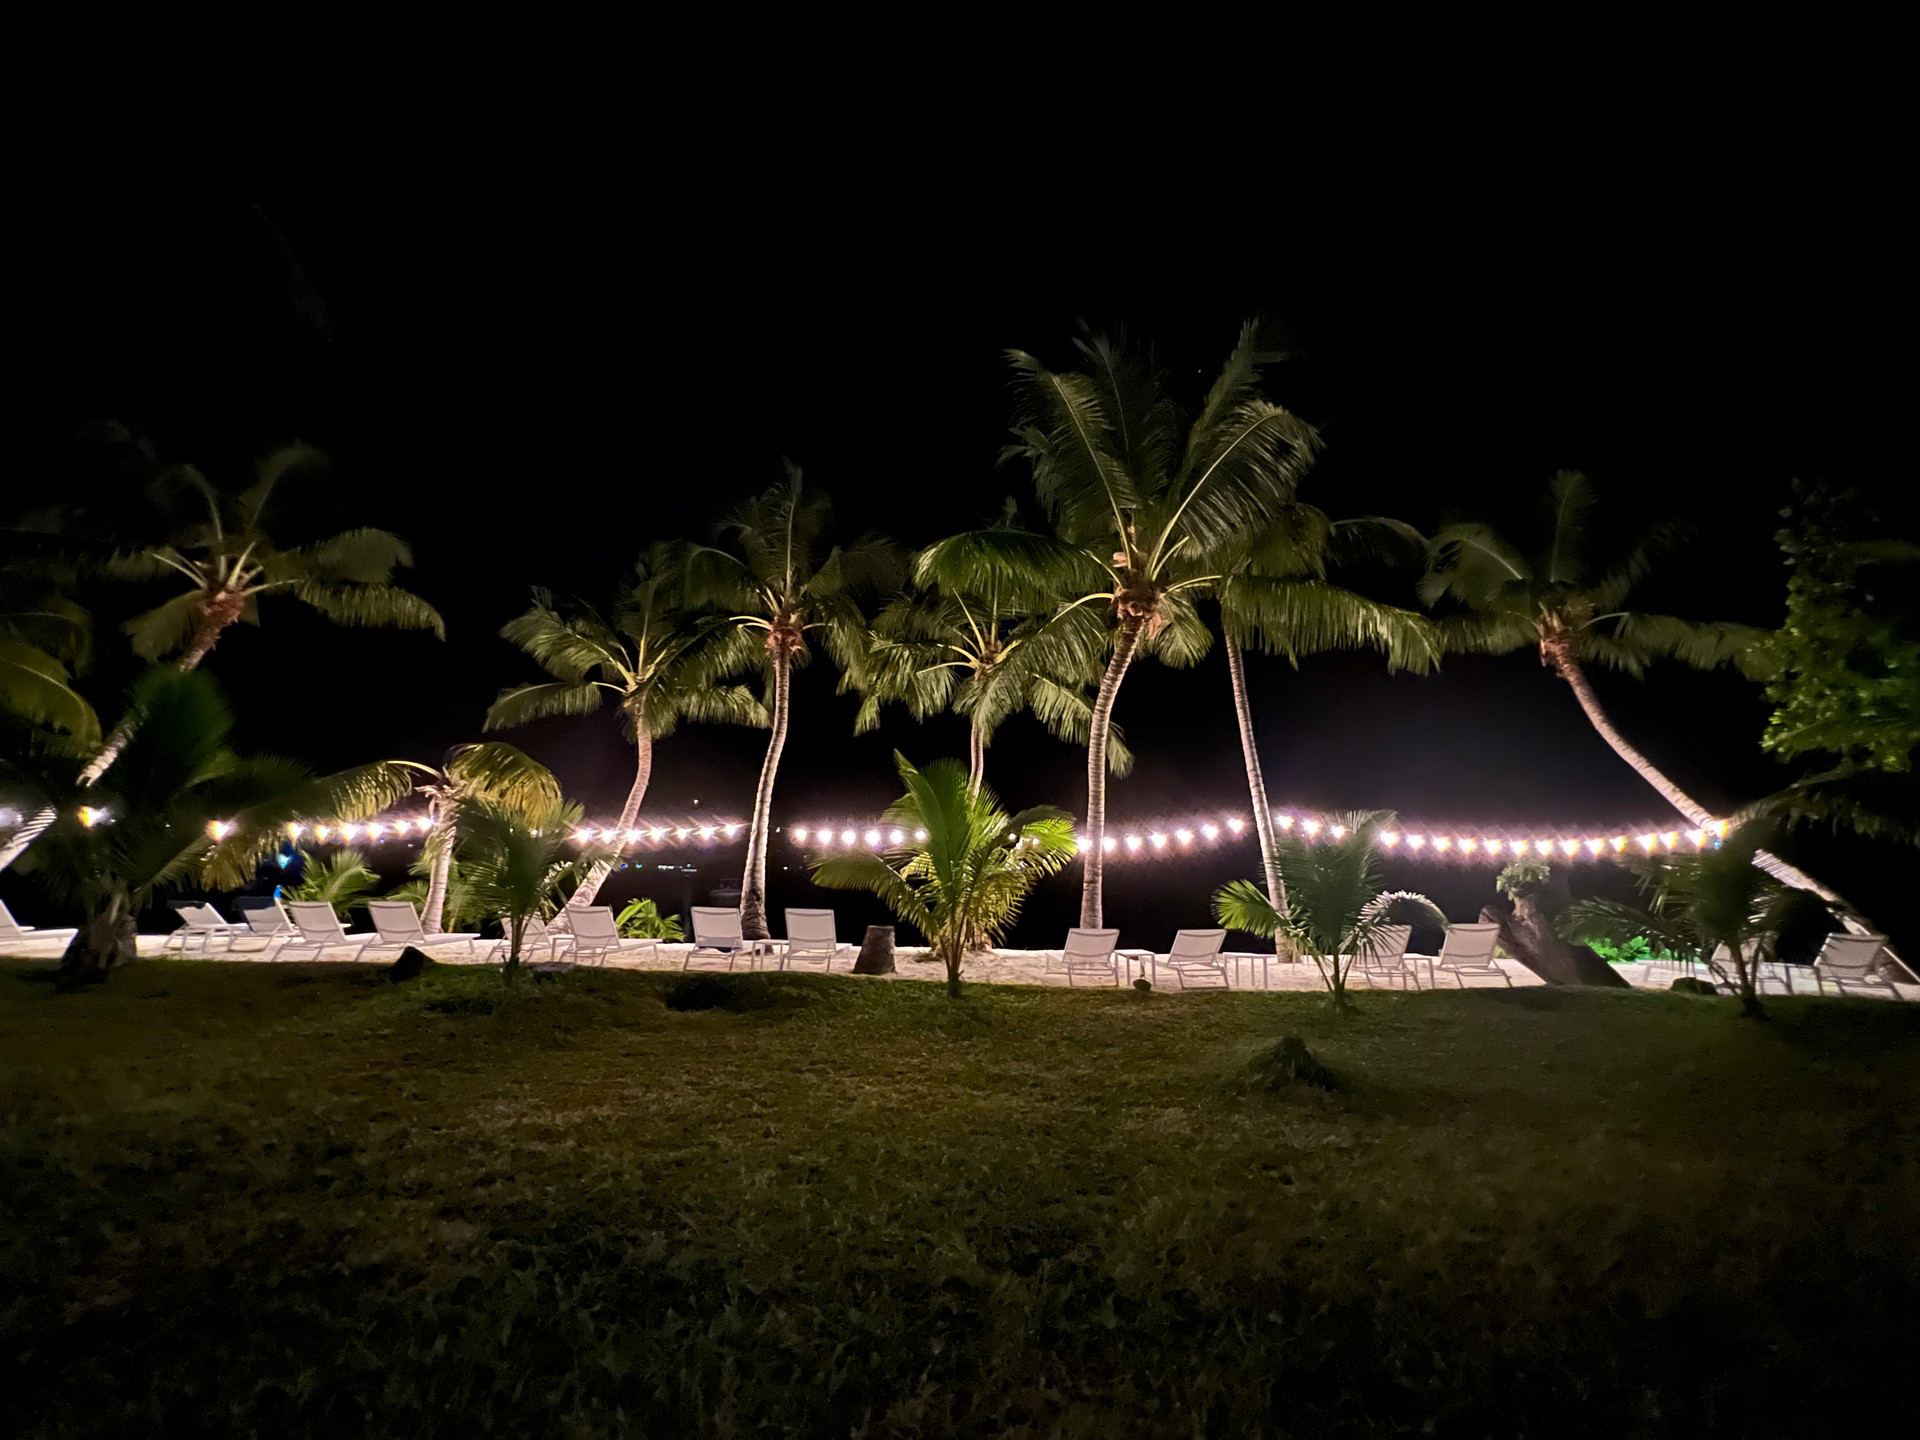 Lighted coconut trees at night at the beach in Seychelles. Seychelles, Vallée De Mai and Anse Lazio